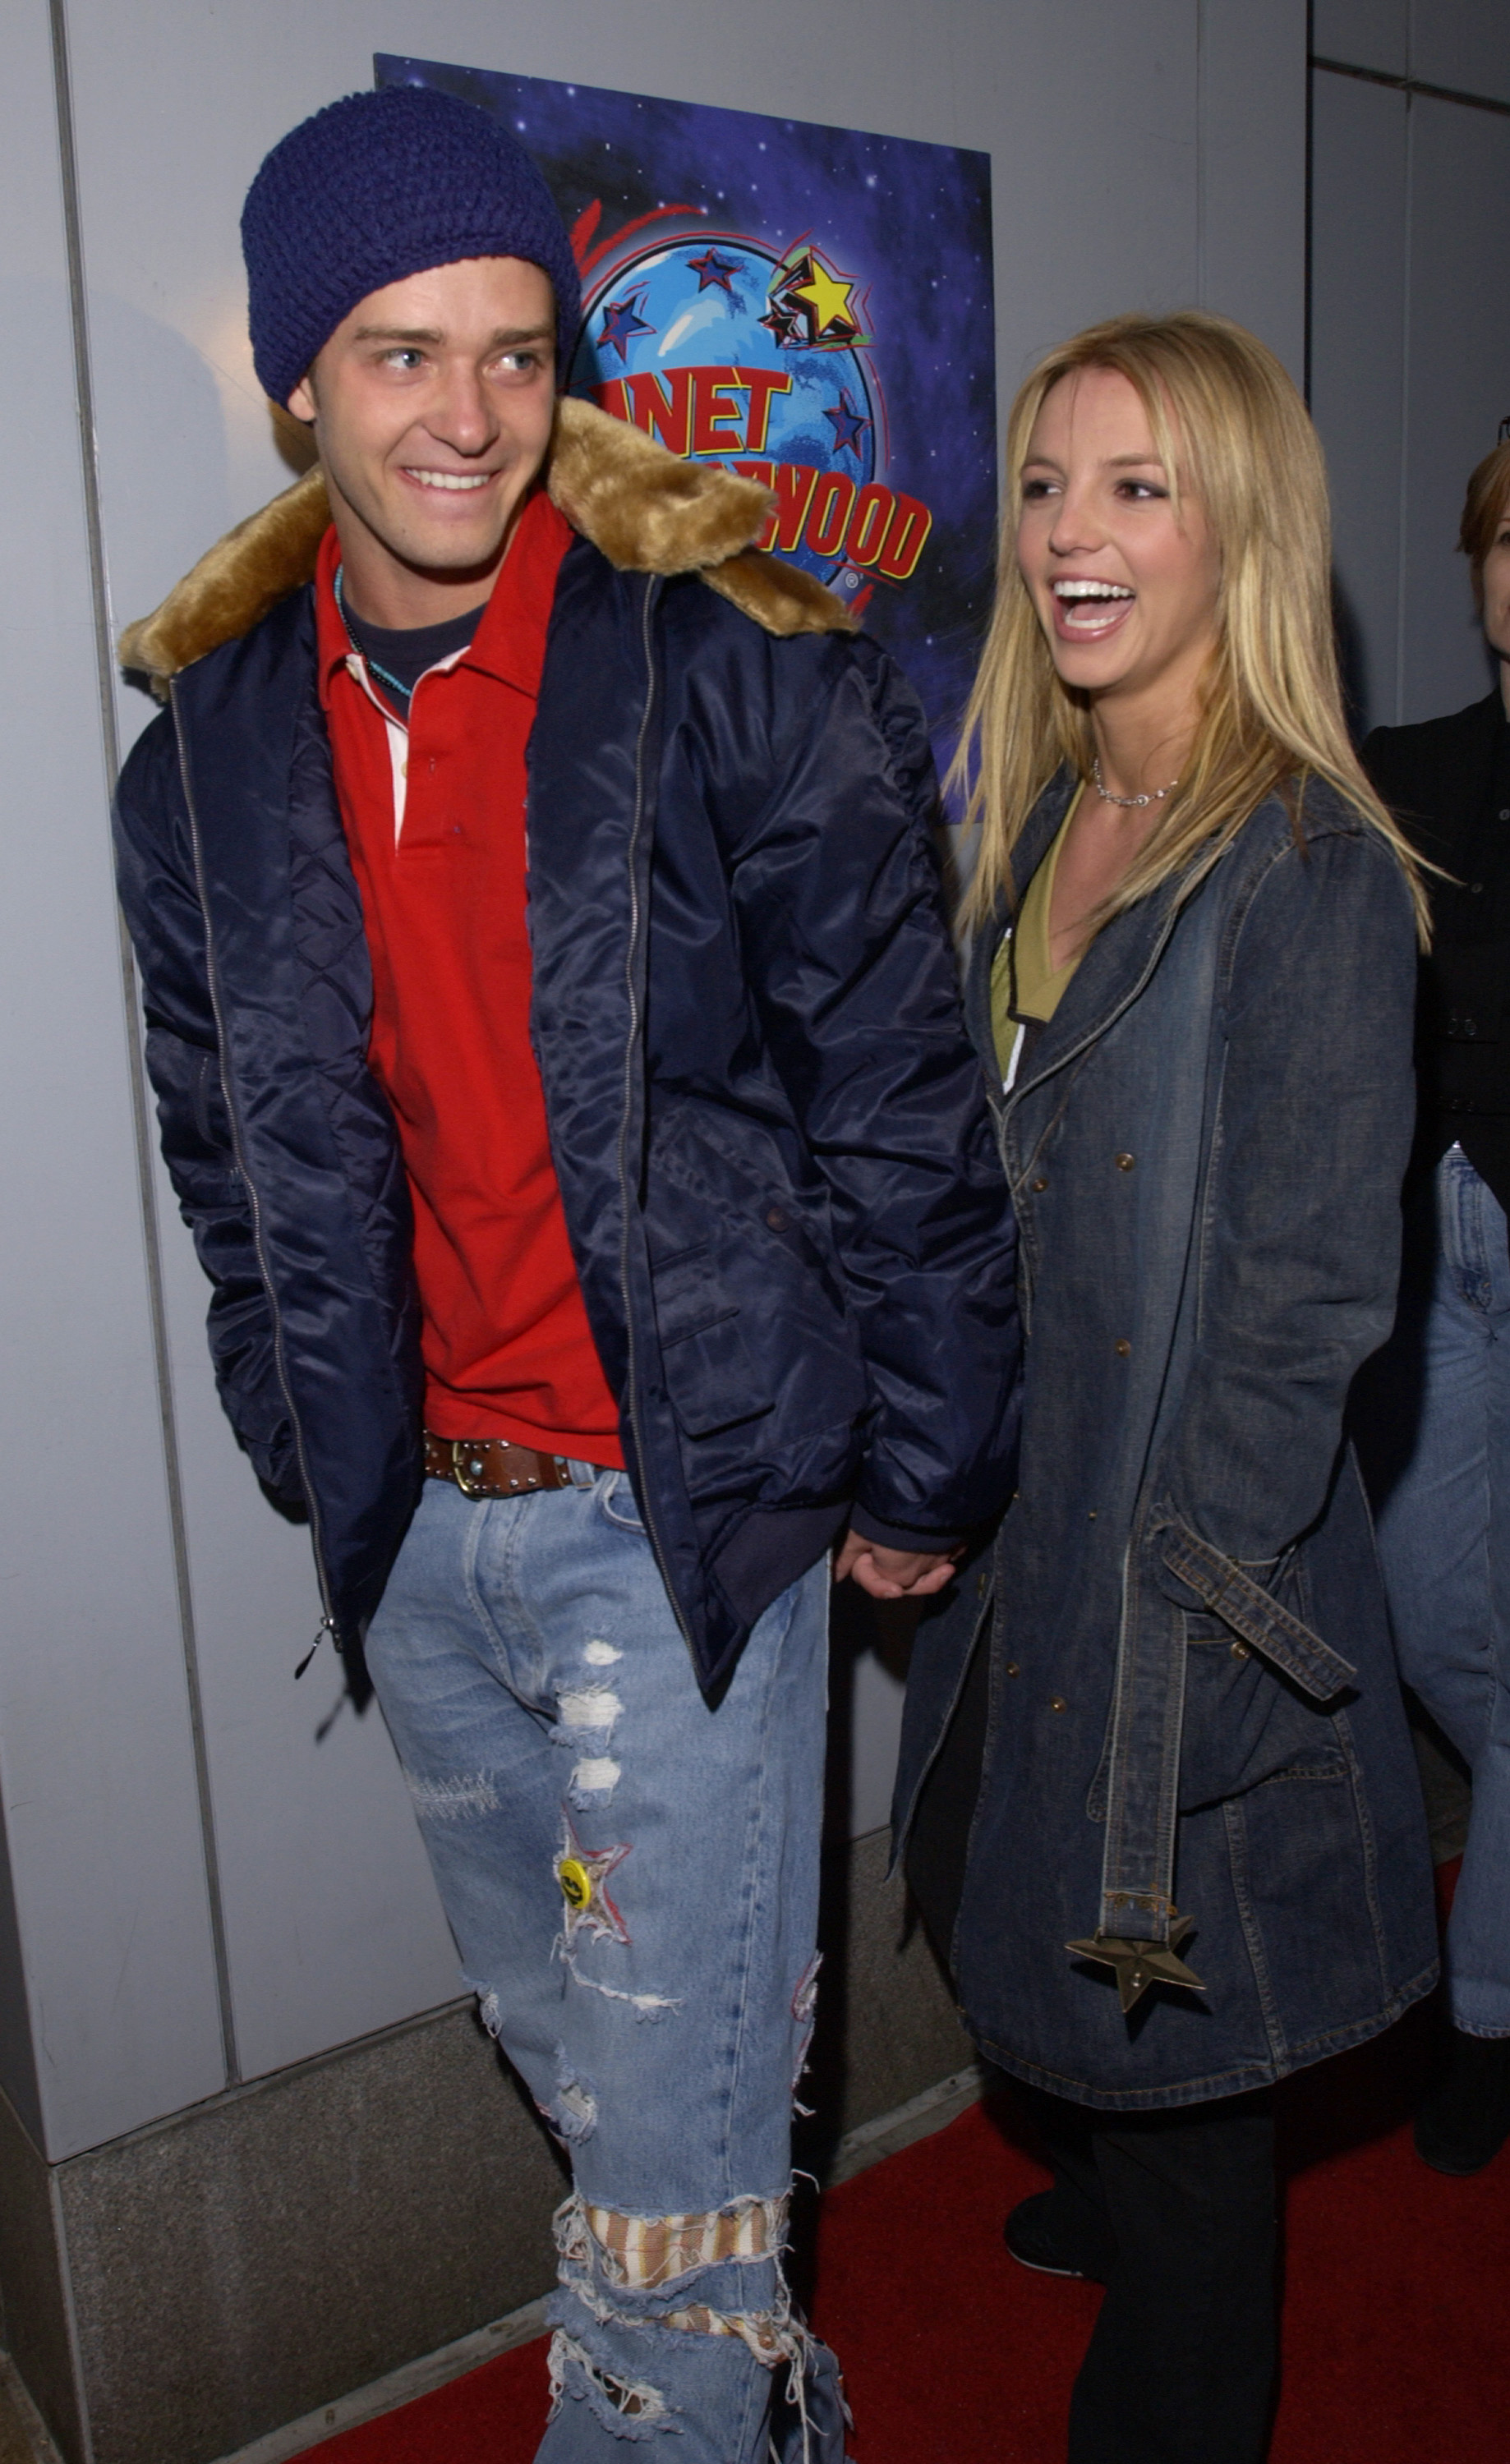 Justin Timberlake and Britney Spears at the Super Bowl Fundraiser in New York City in 2002. | Source: Getty Images